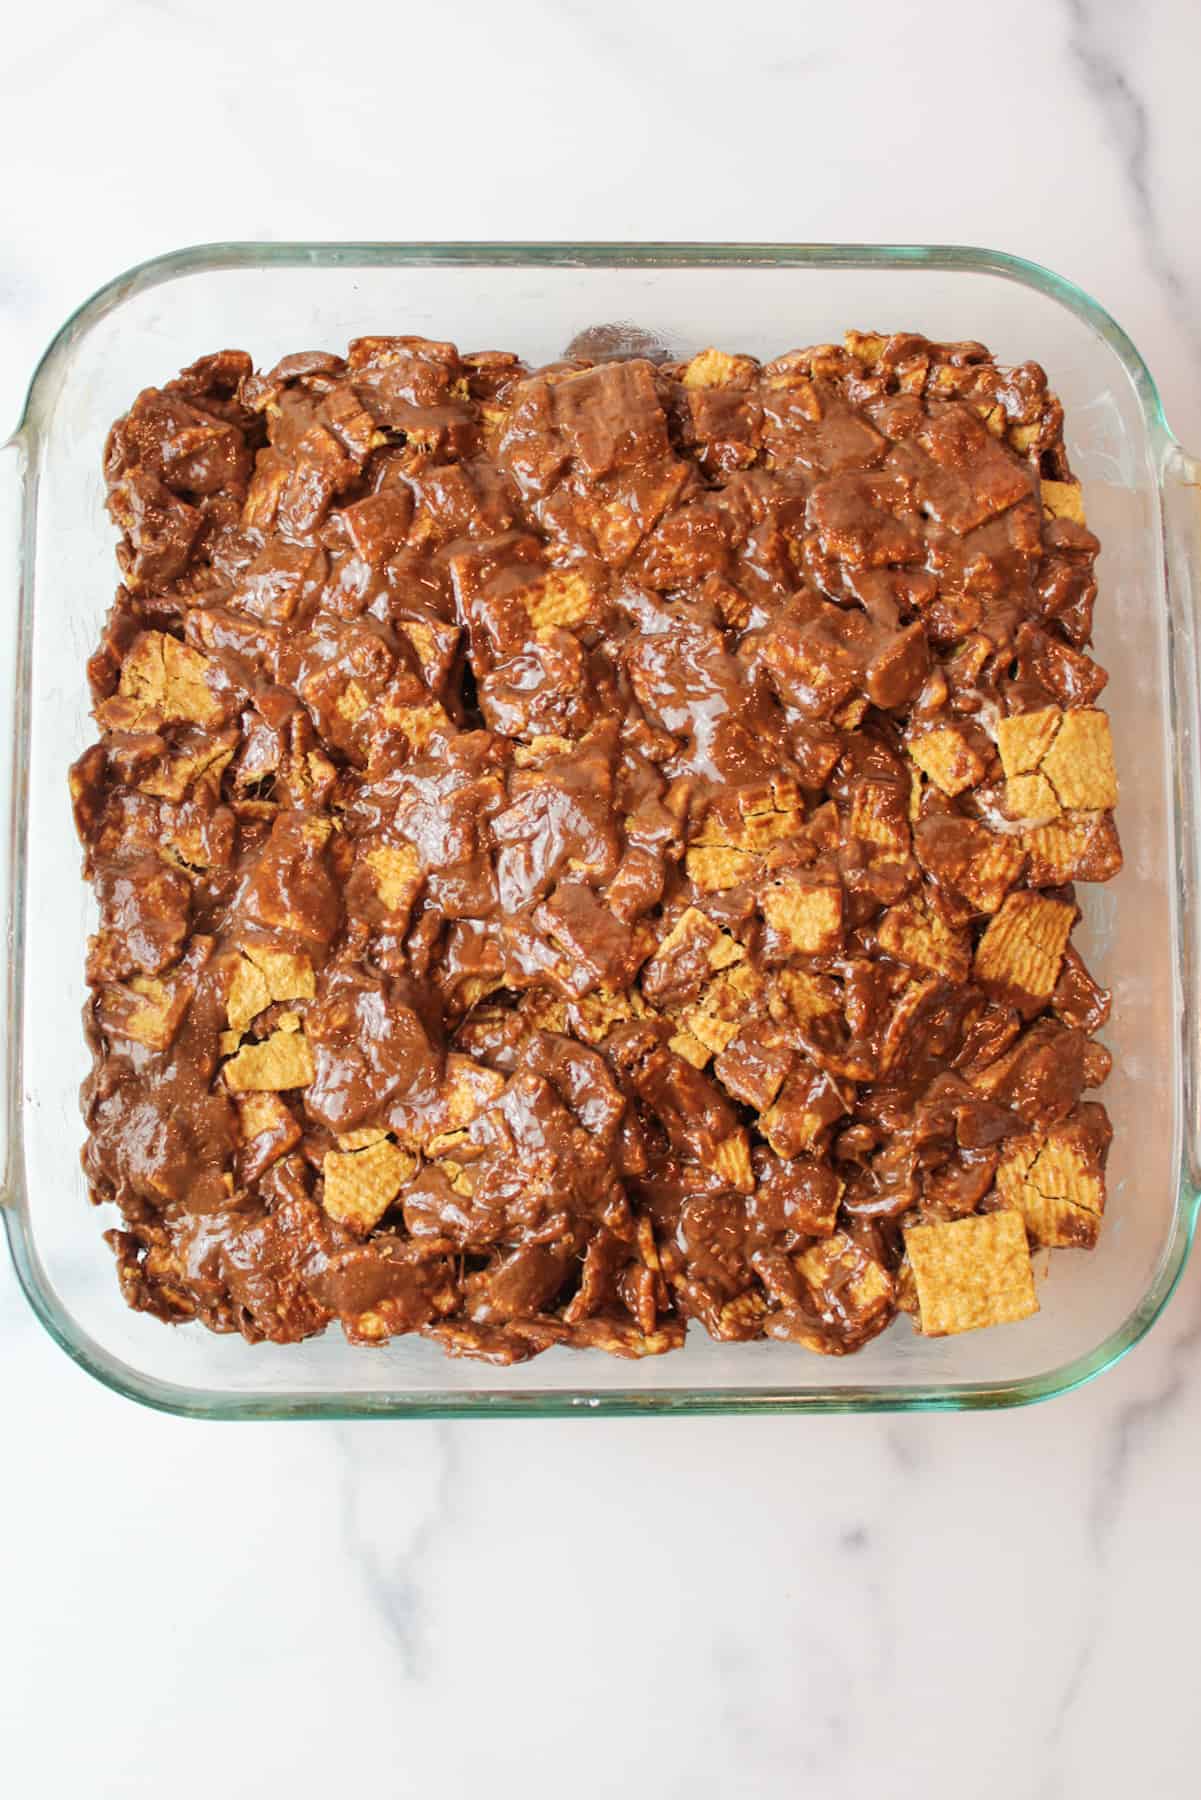 chocolate marshmallow cereal in a 8x8 baking dish.